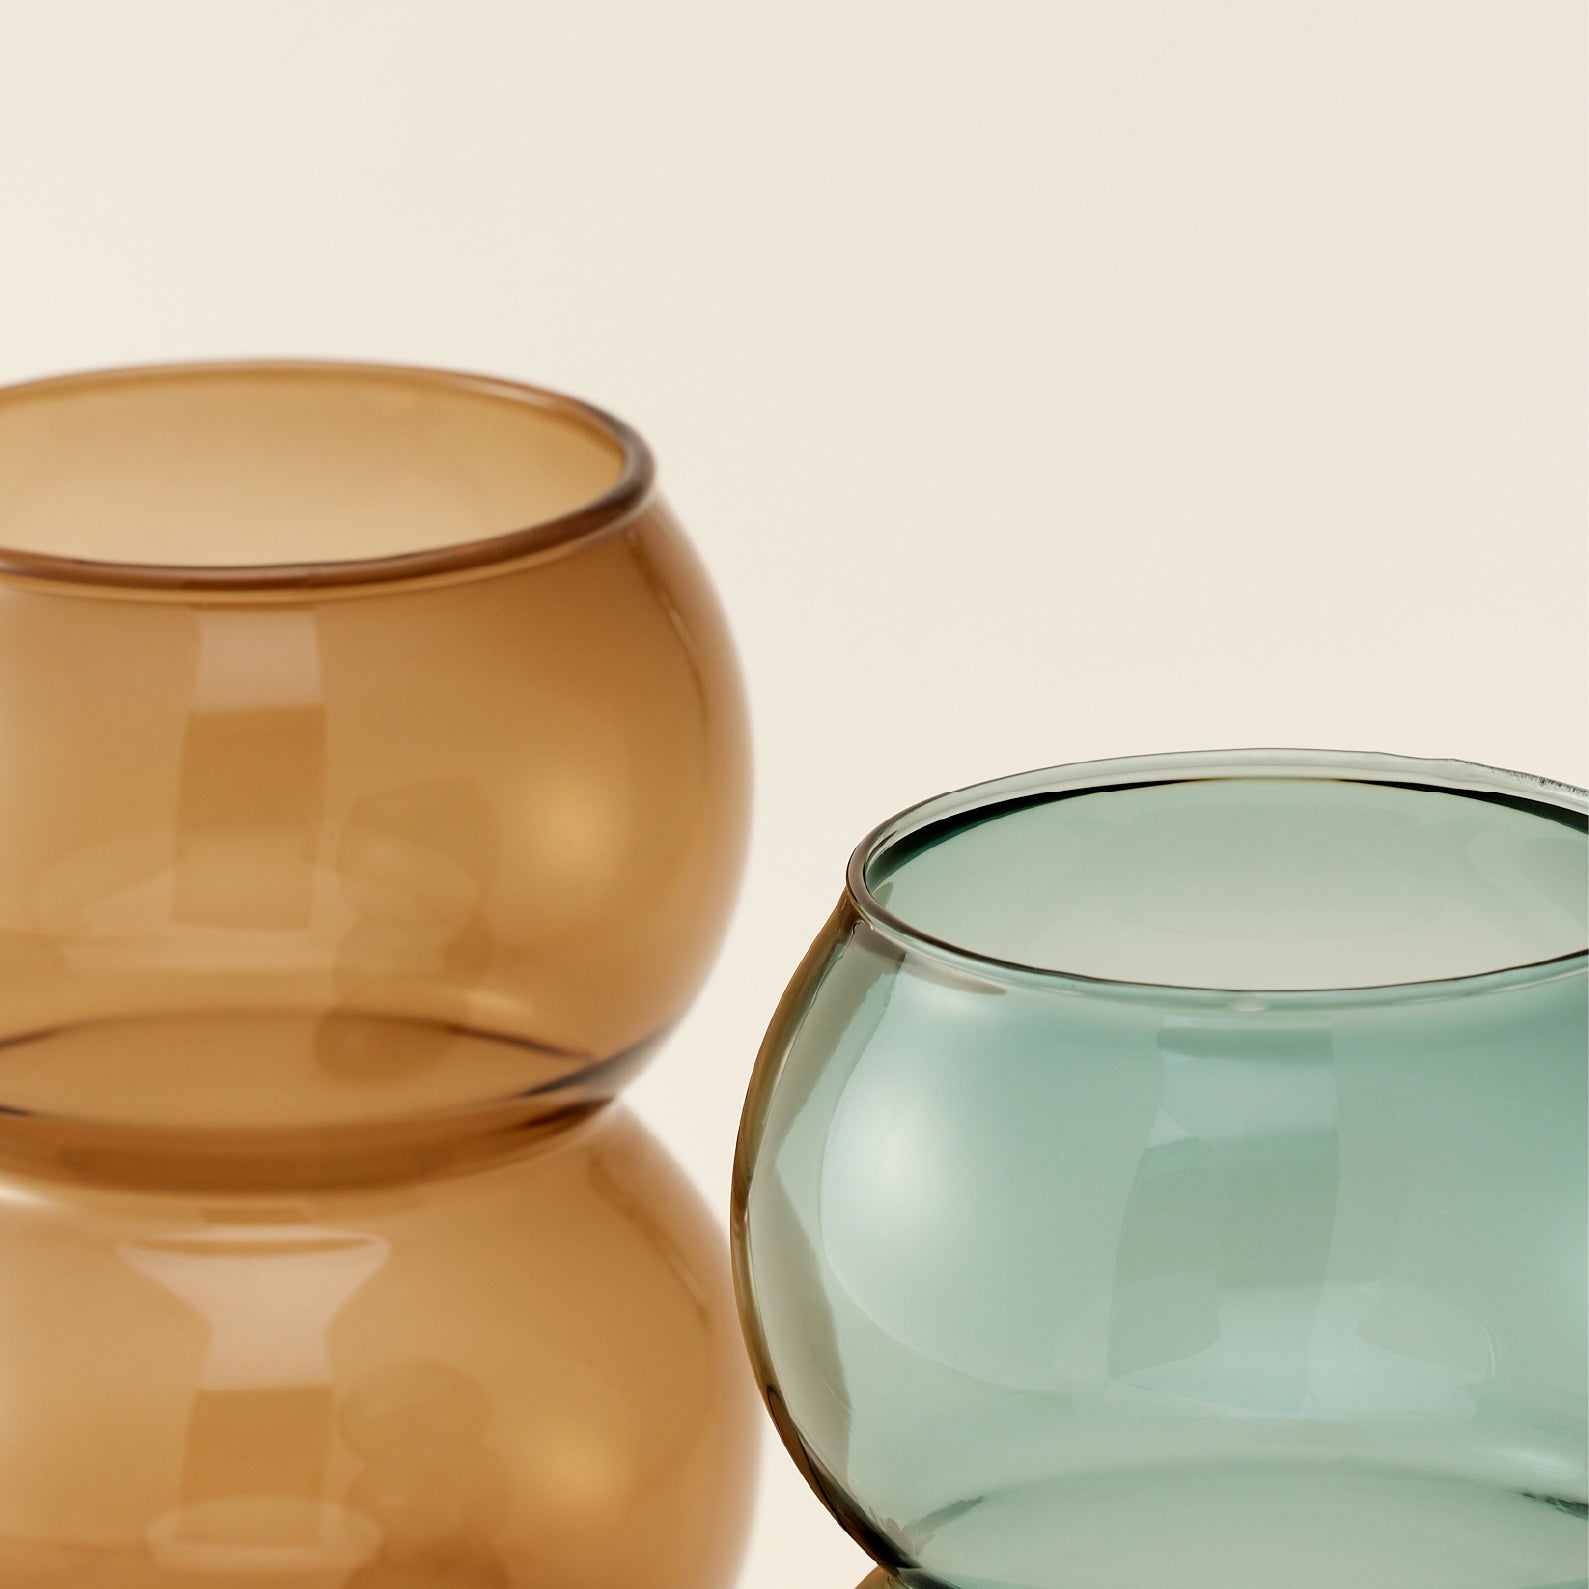 Eastern Glass Bubble Glass Vase | แจกัน